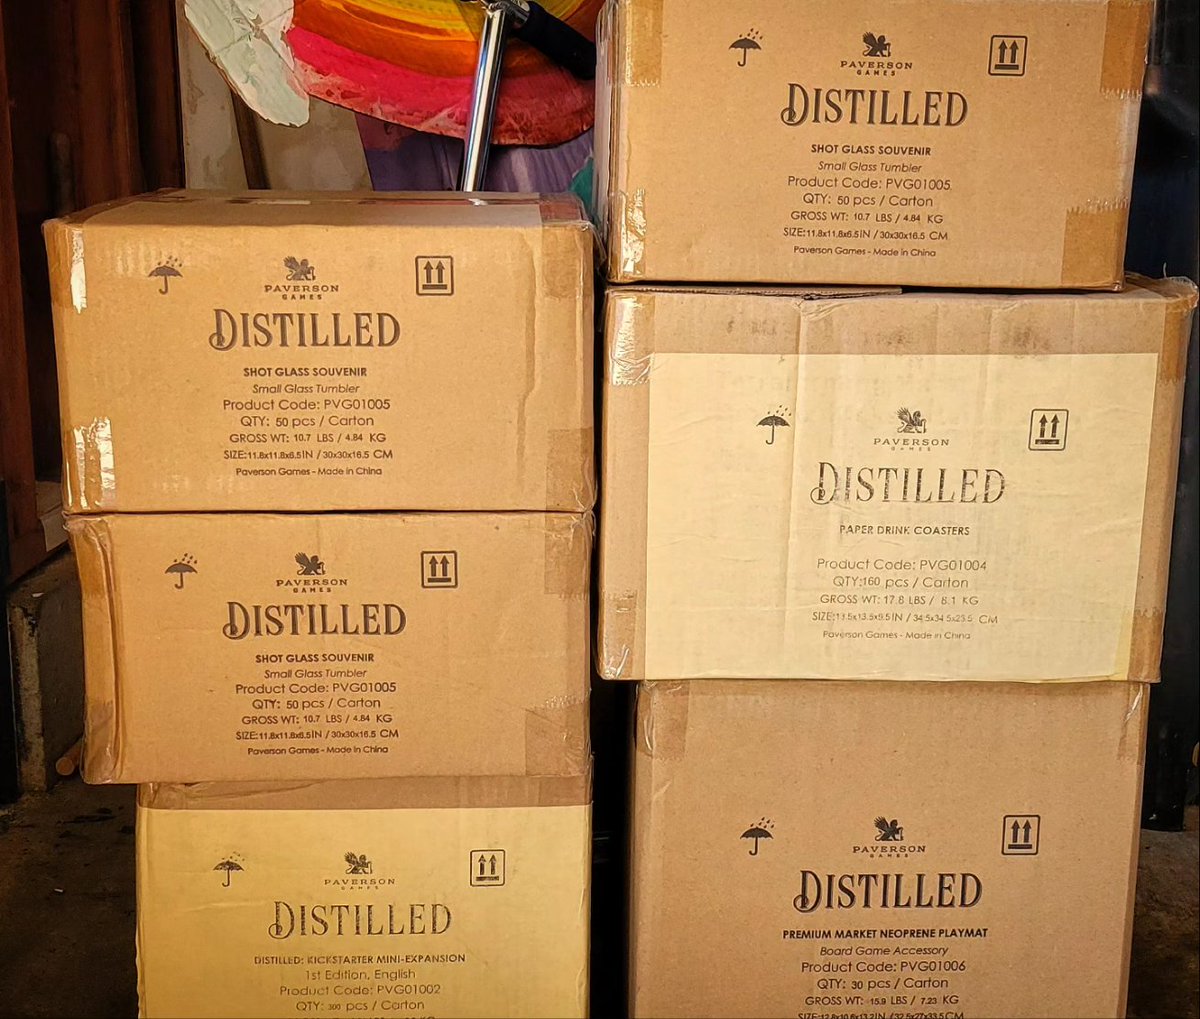 Back after an amazing #GenCon. This may be the last time I'll be able to fit the entire #PaversonGames booth under my stairs for storage. Boxes pic is all we had left to bring home after starting with 4 pallets at #GenCon23! #distilled #distilledgame #luthier #luthiergame